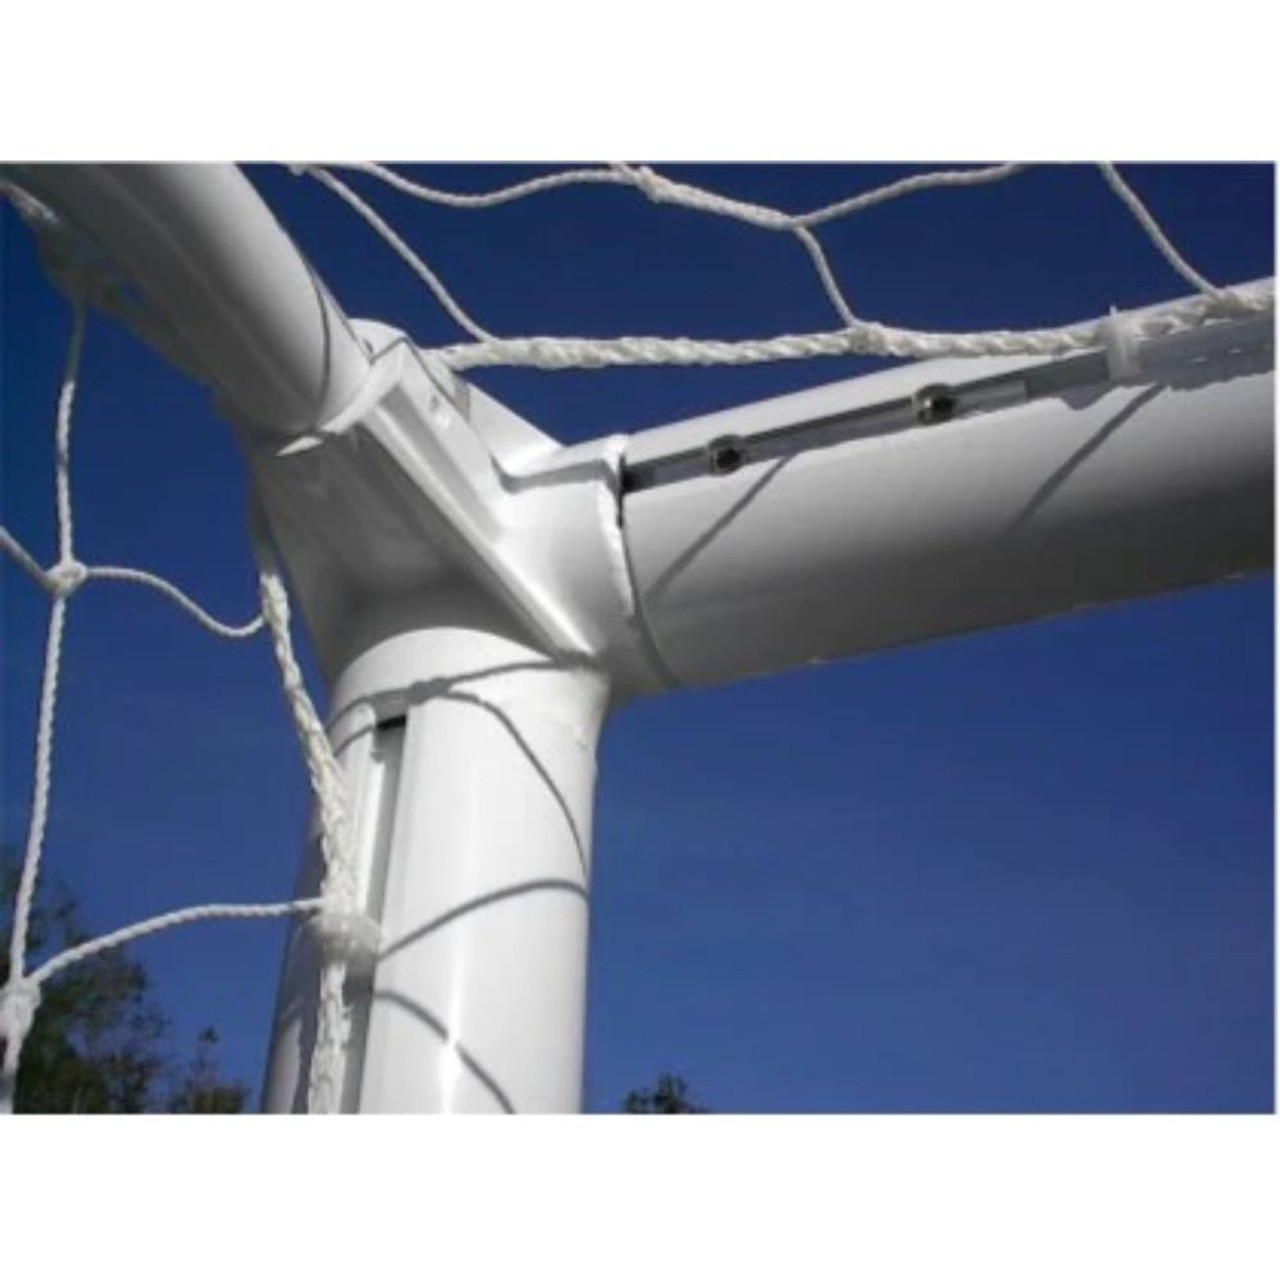 Channel Series Soccer Goal - 8' x 24' - top